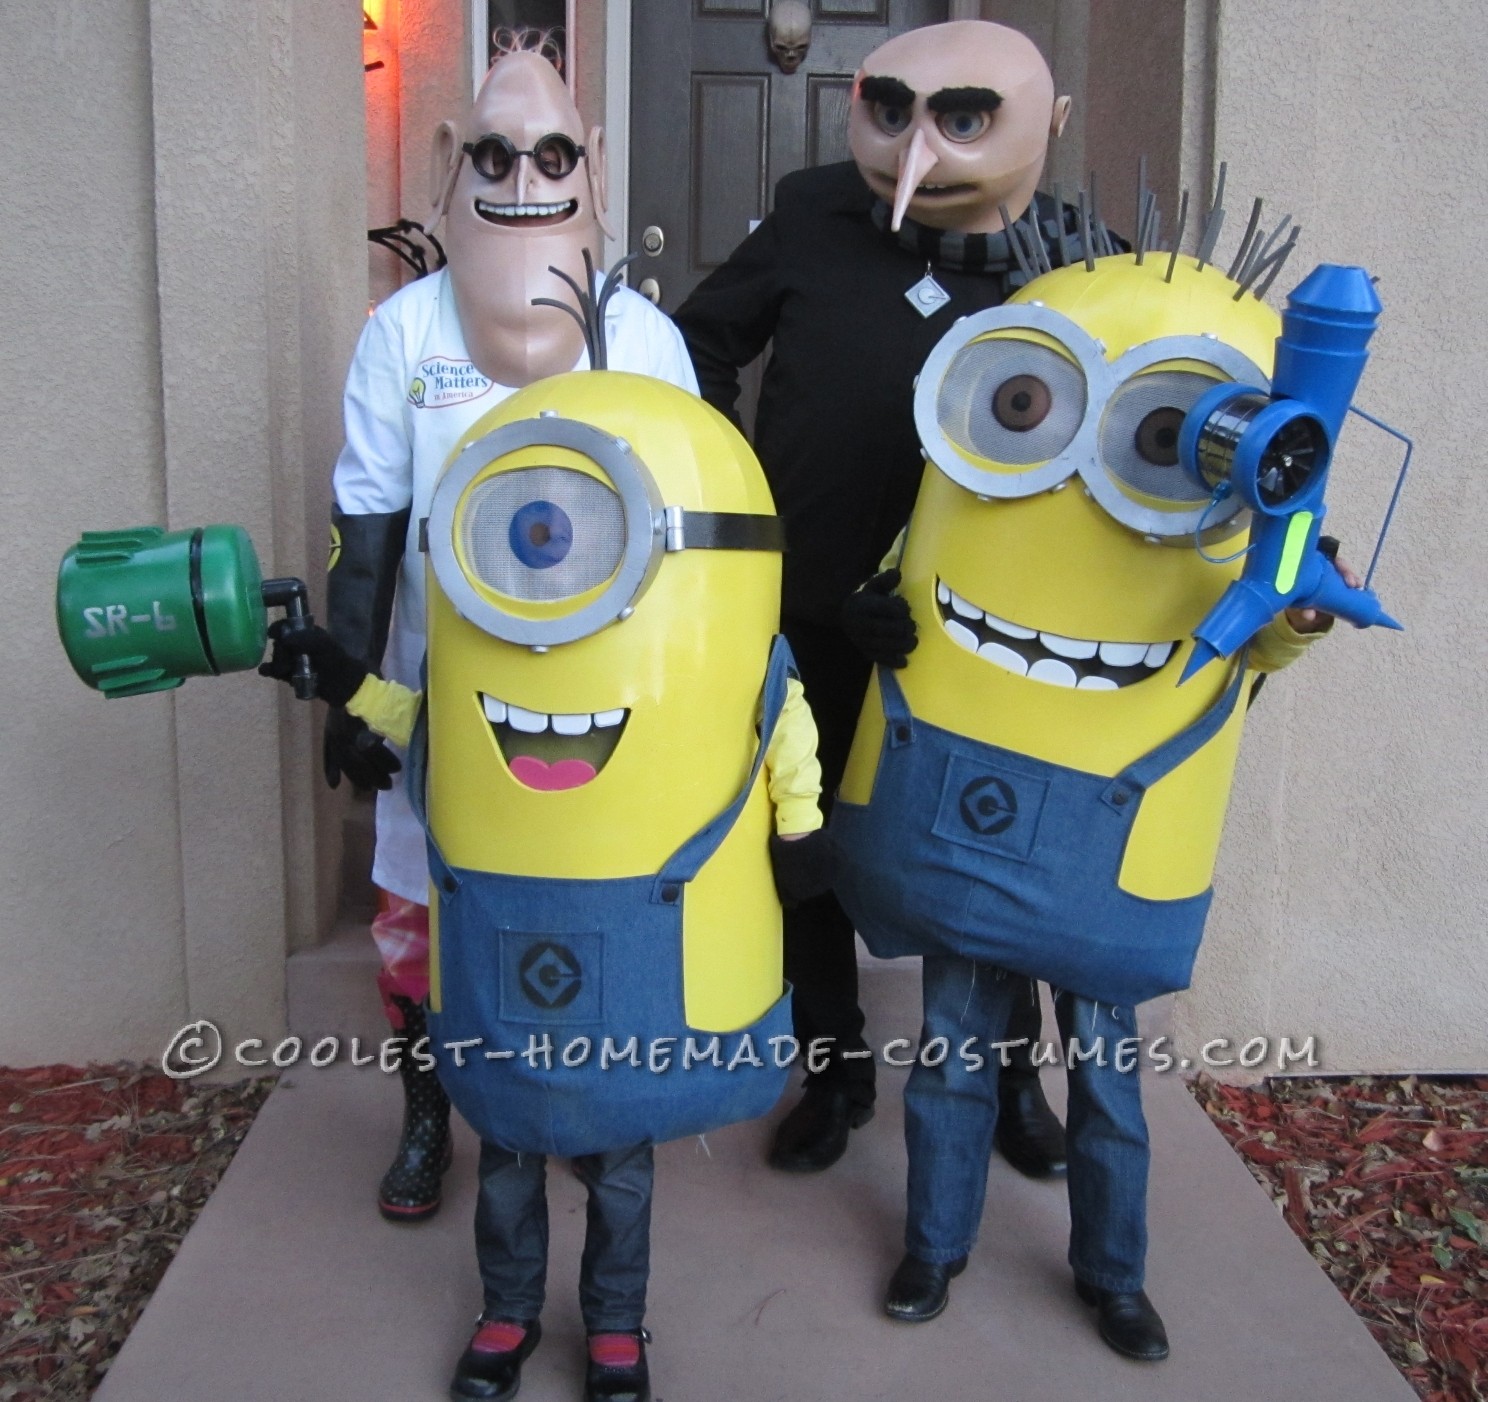 Over-the-Top Despicable Me Family Costumes - Entirely Homemade!